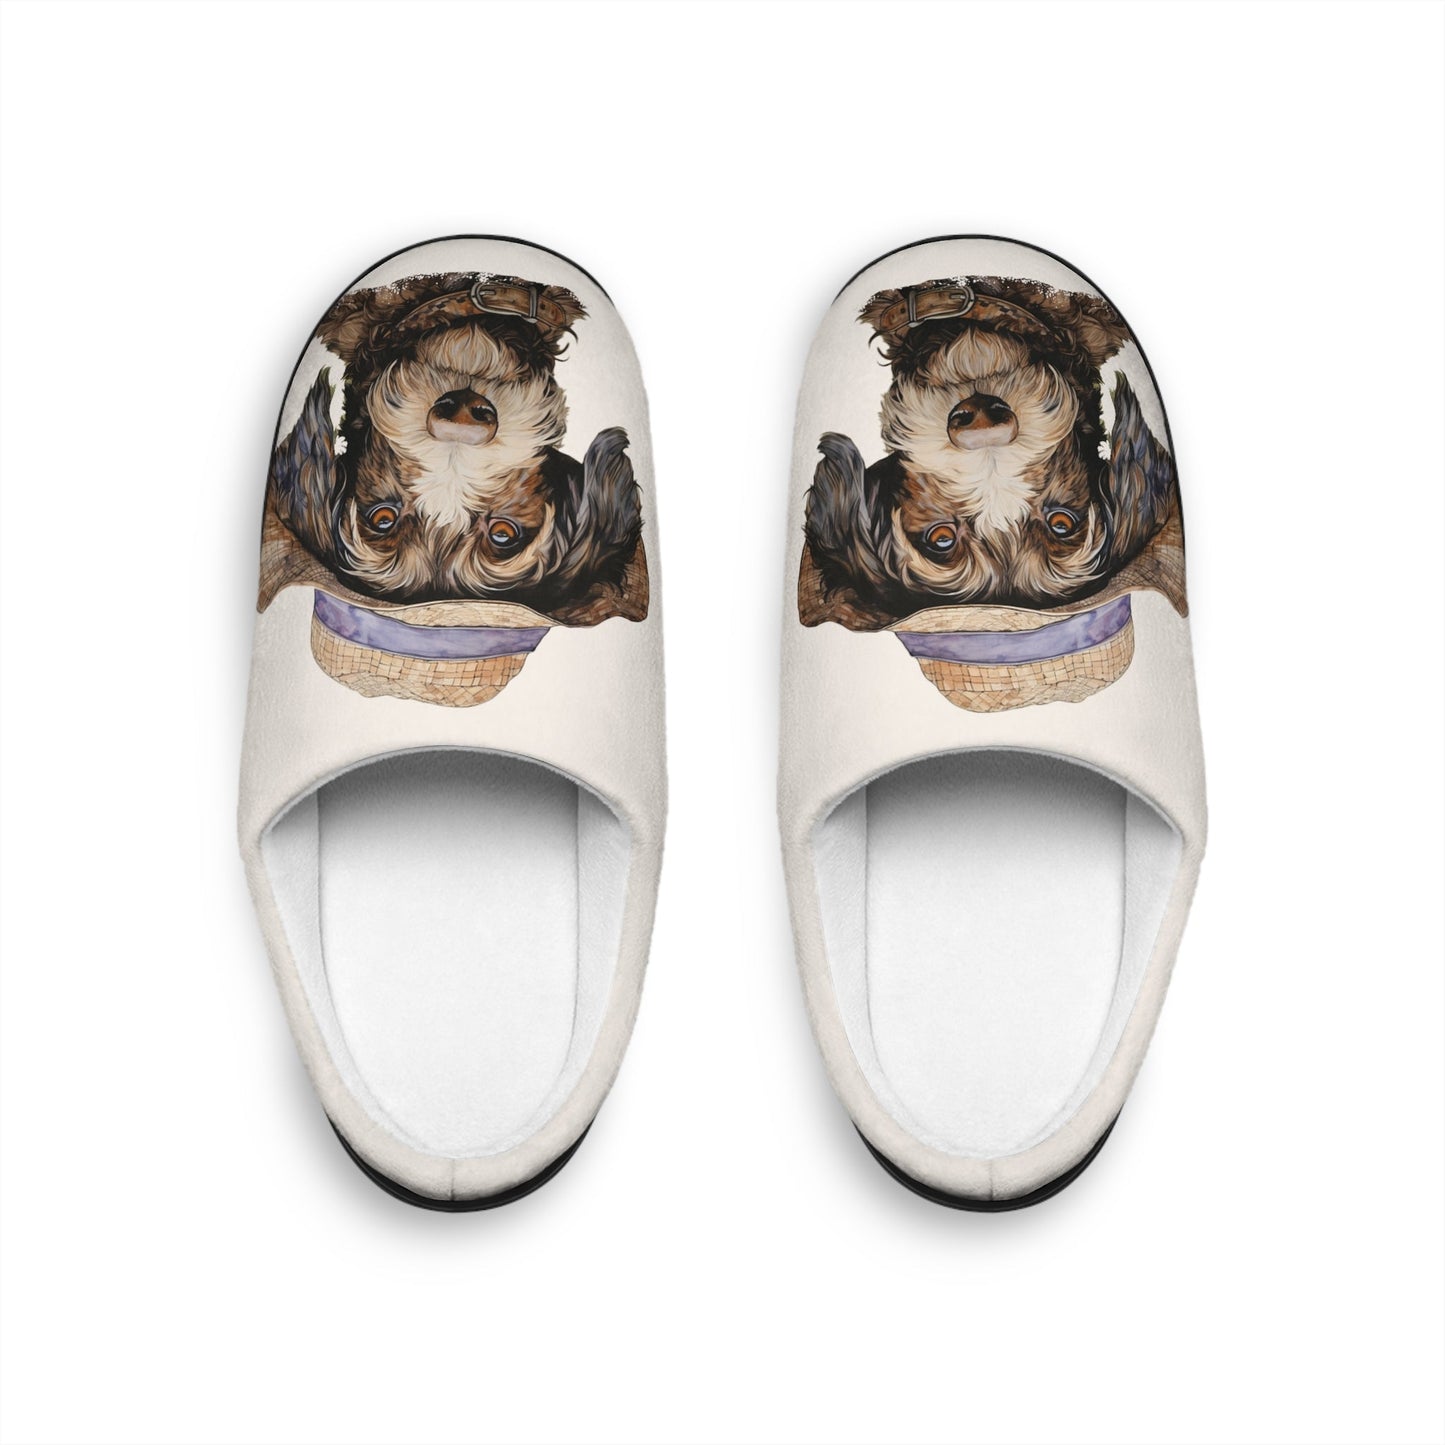 Cute Dog Slippers, Whimsical Dog with Hat Slippers, Comfy Indoor Slippers - FlooredByArt